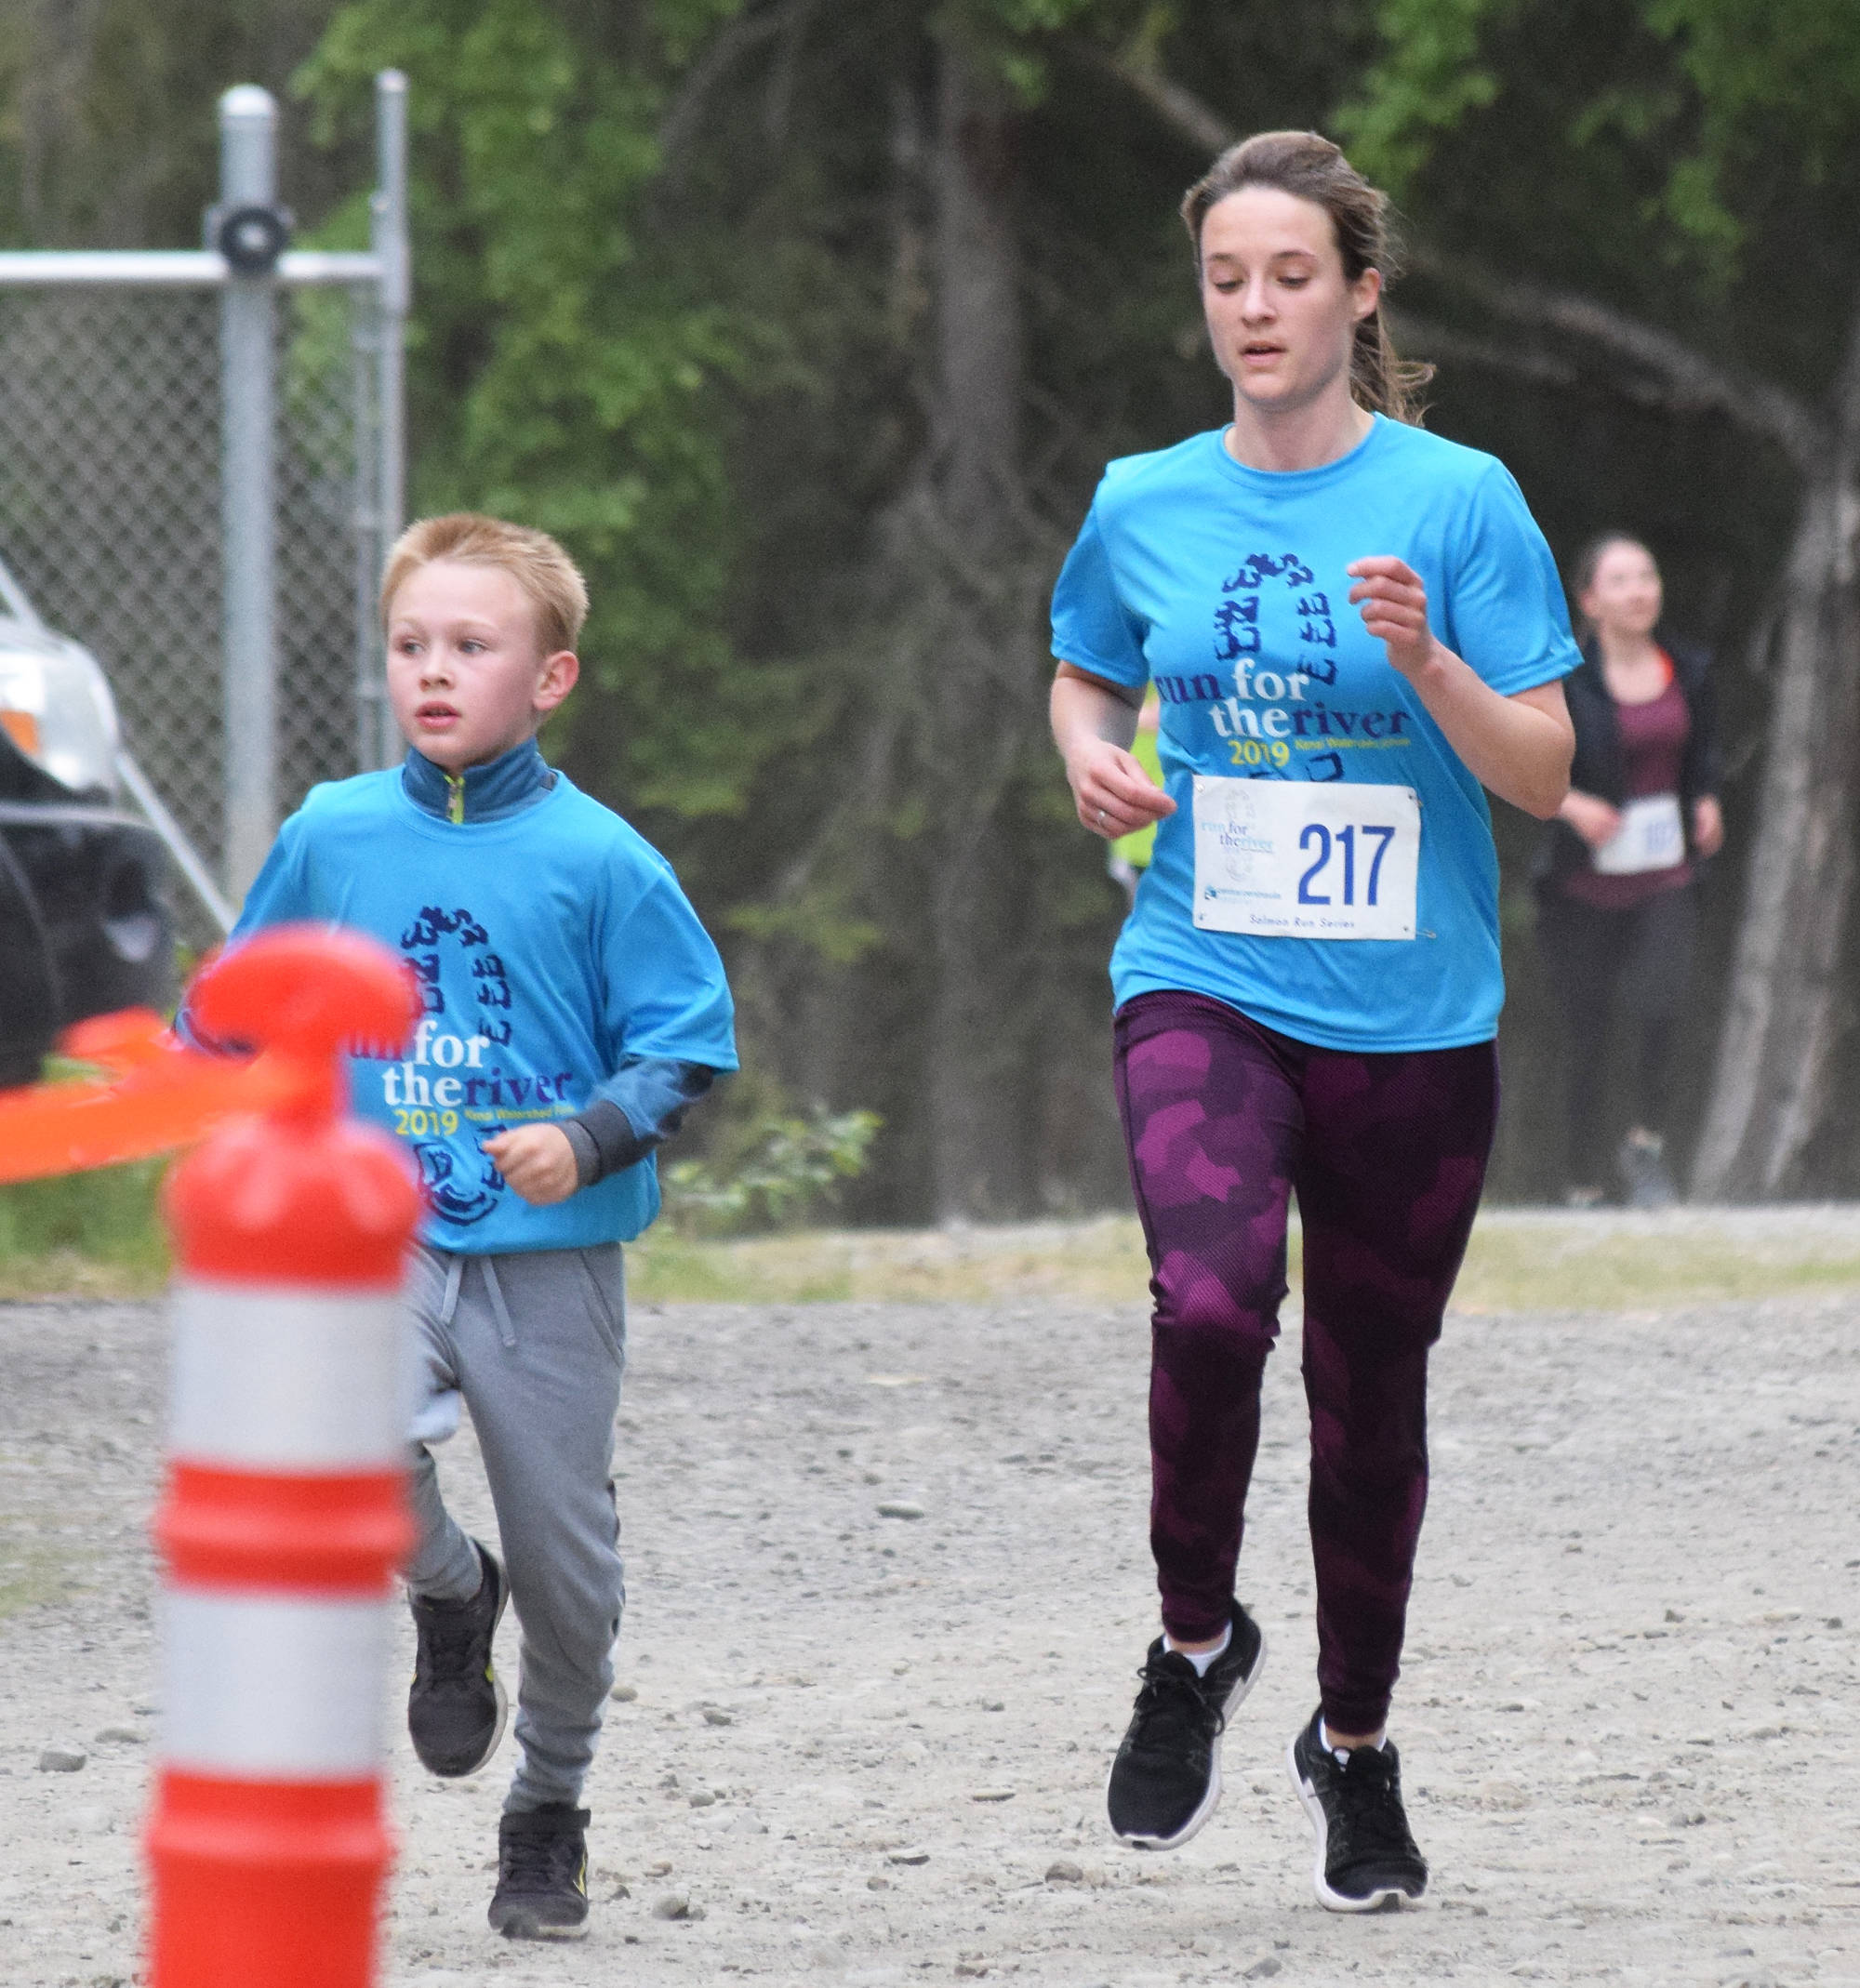 Amanda Millay races to the finish line Saturday, June 8, 2019, at the Run for the River 5-kilometer/10-mile races in Soldotna, Alaska. (Photo by Joey Klecka/Peninsula Clarion)